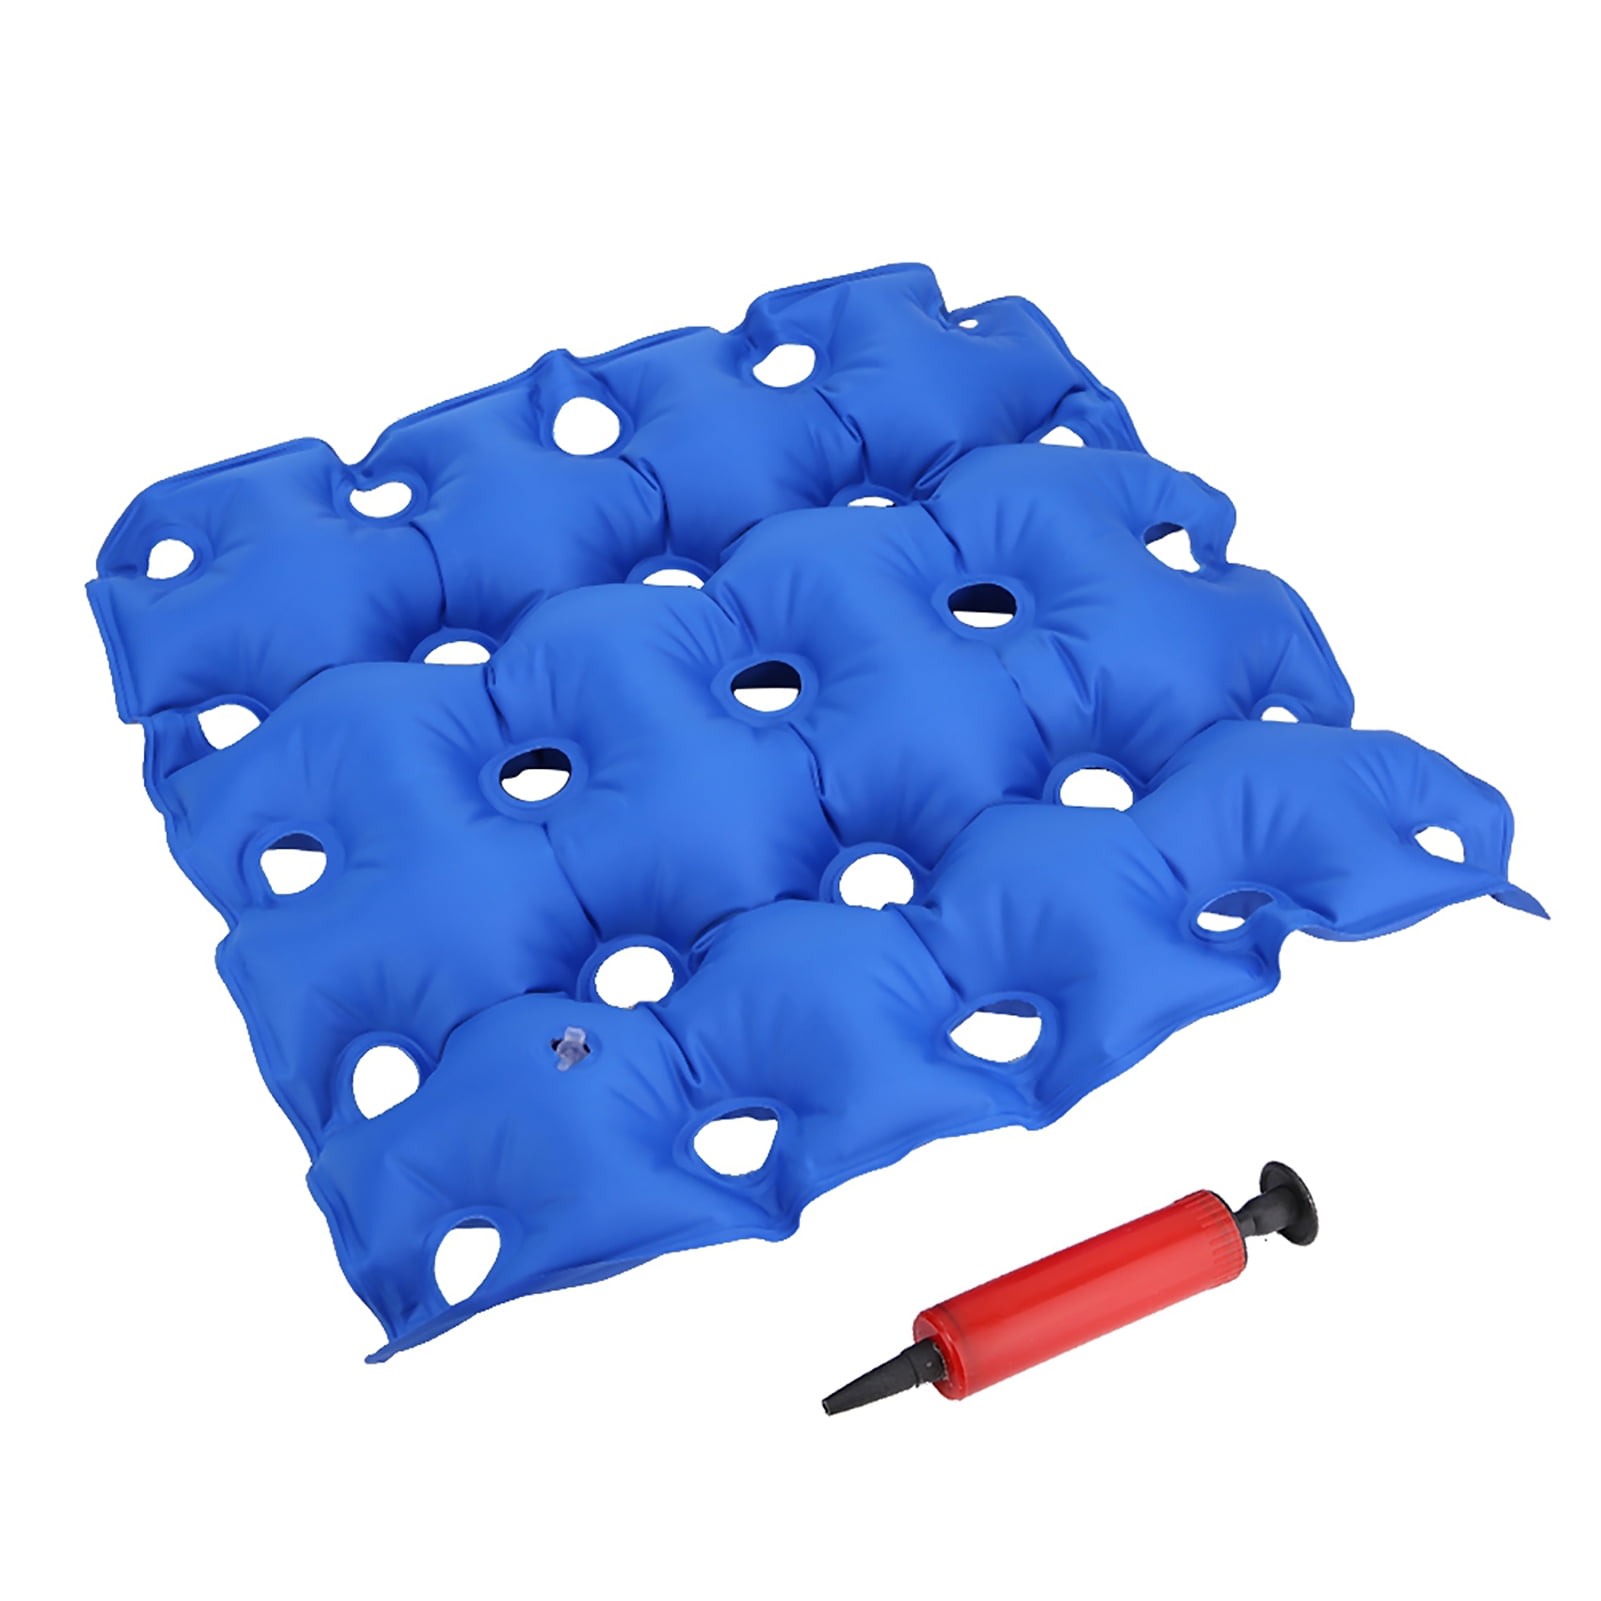 Waffle Cushion Pressure Relief - Wheelchair Cushions for Pressure Sores for  Sitting - Inflatable Coccyx Air Seat Cushion to Relief Back & Tailbone Pain  